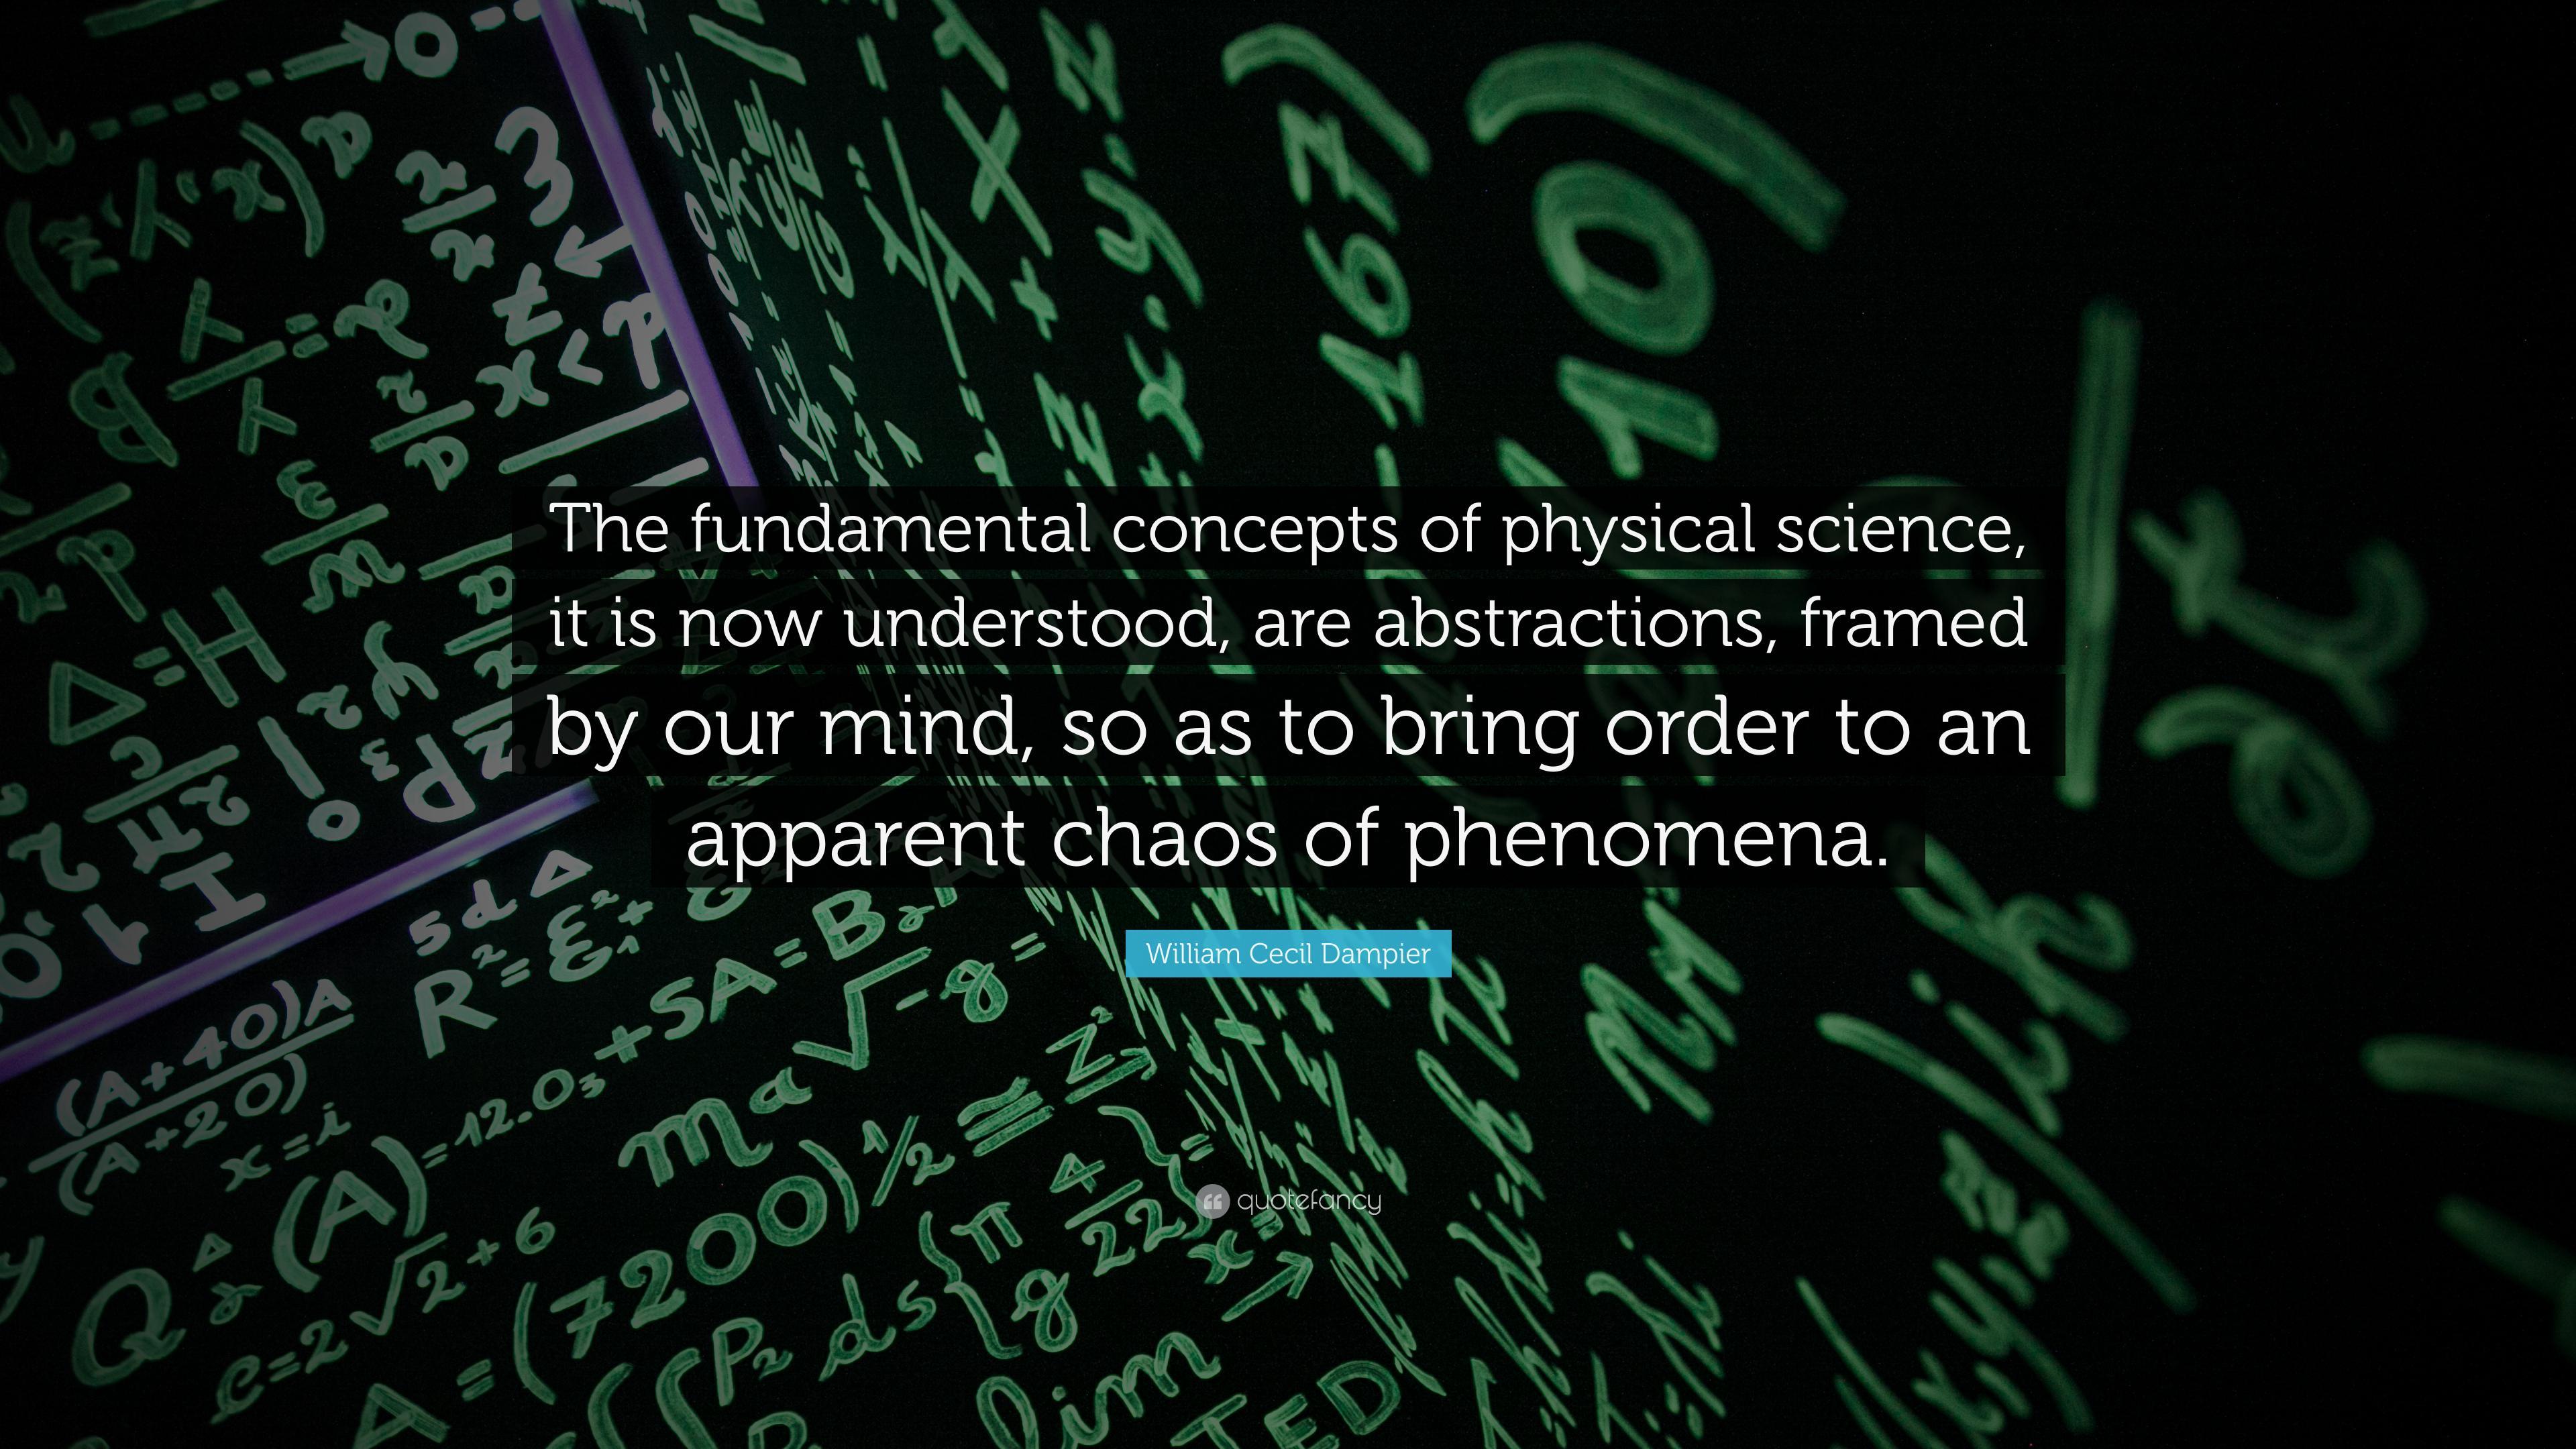 William Cecil Dampier Quote: “The fundamental concepts of physical